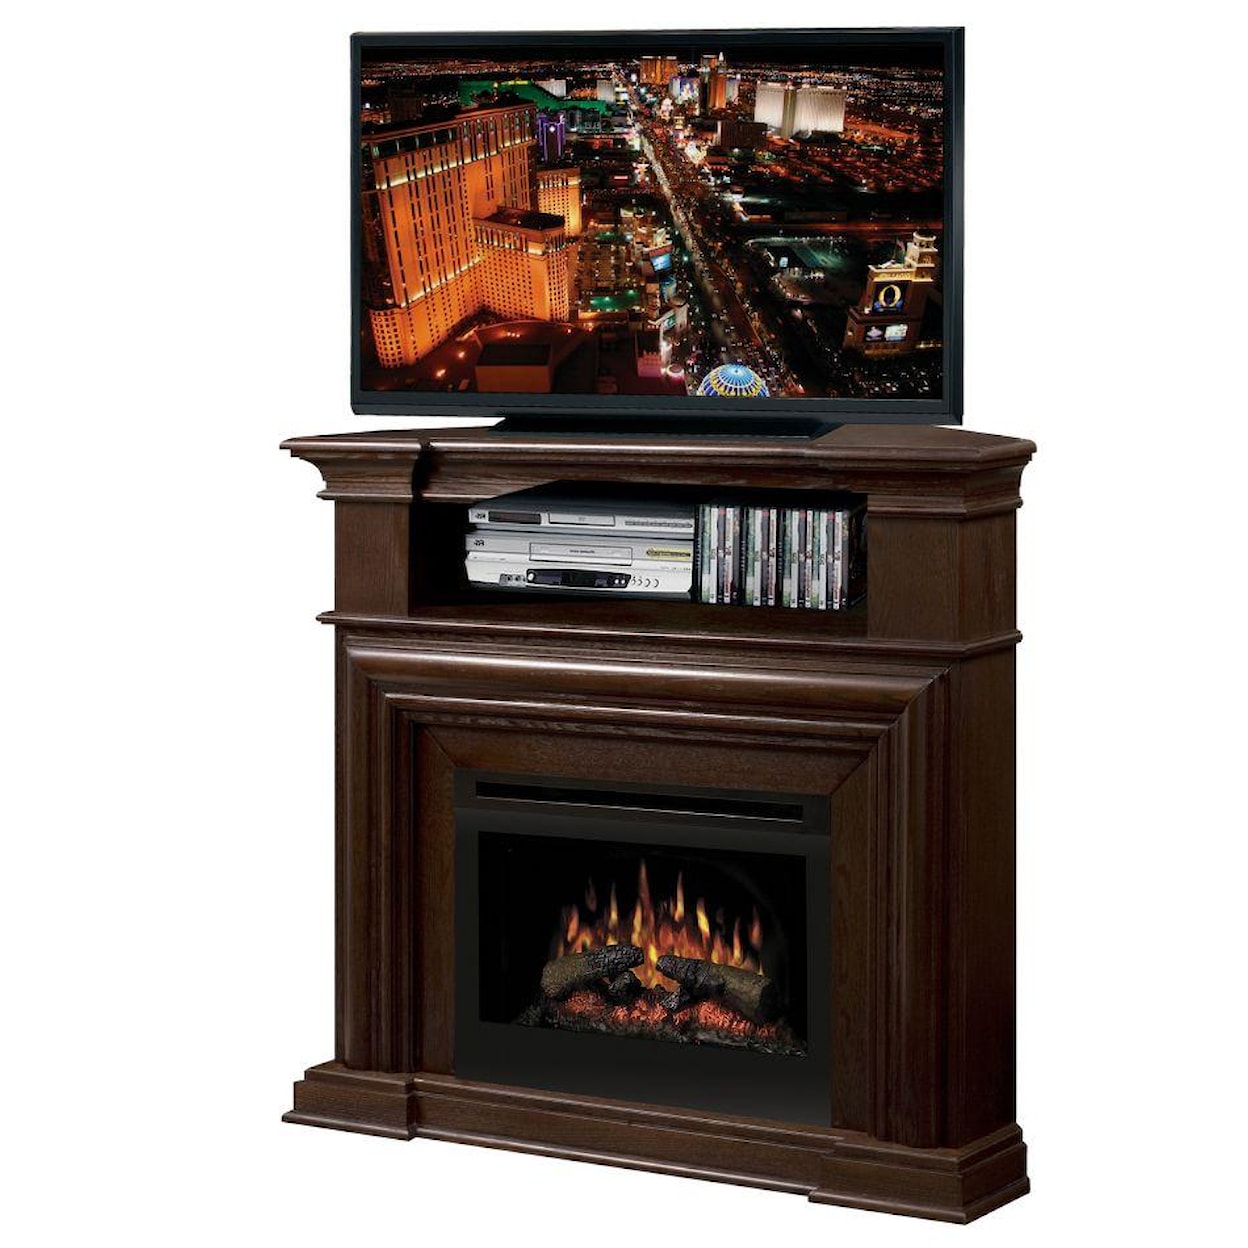 Dimplex Media Console Fireplaces Montgomery Corner Media Console Fireplace